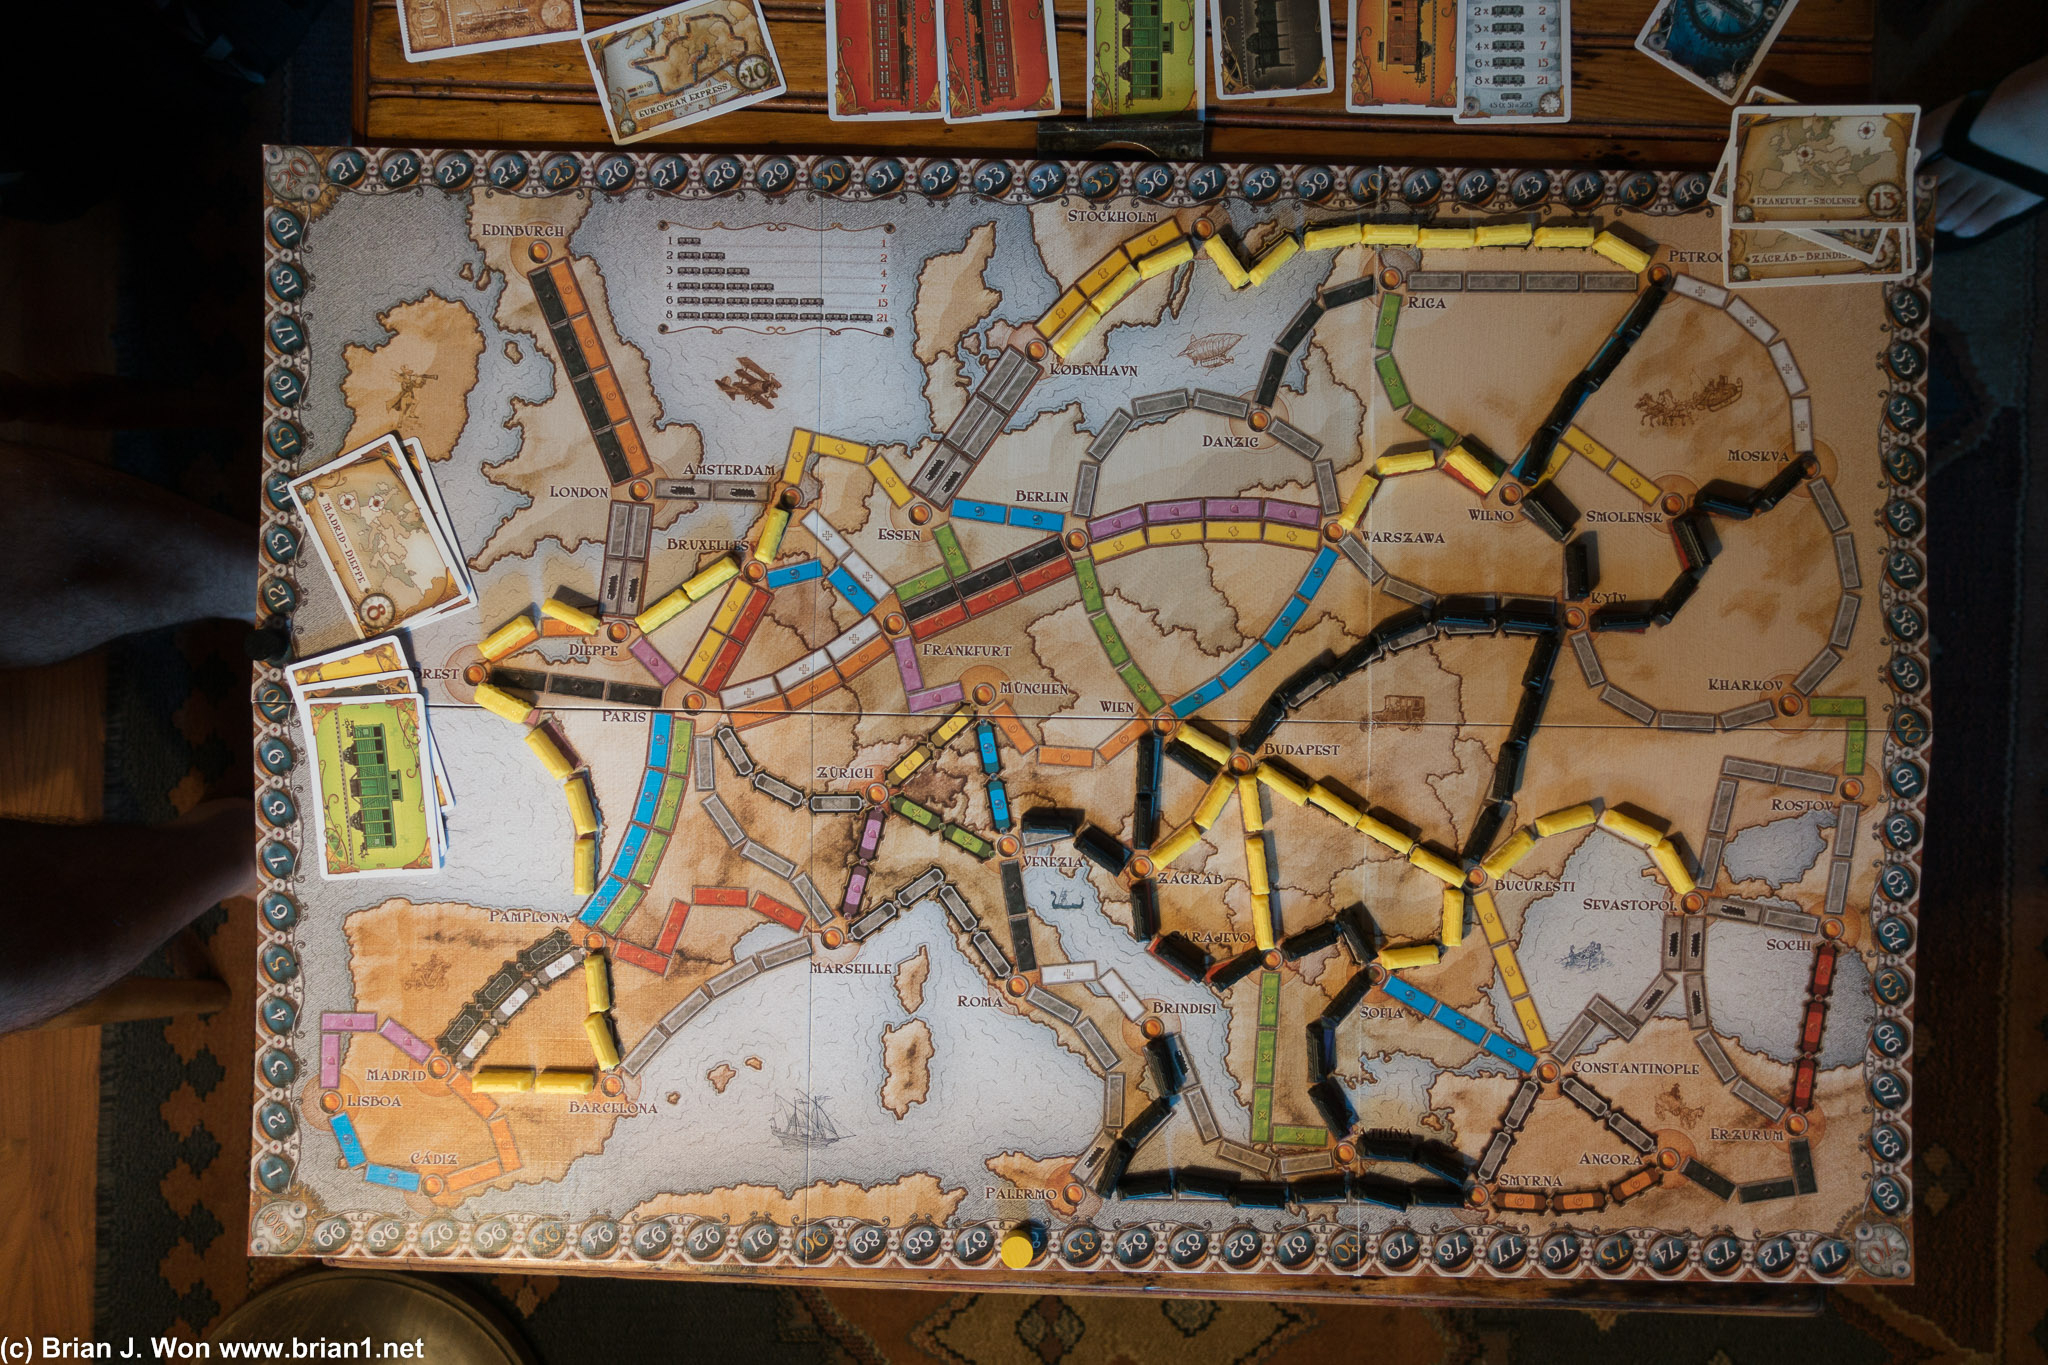 Chris' victory in Ticket to Ride: Europe.